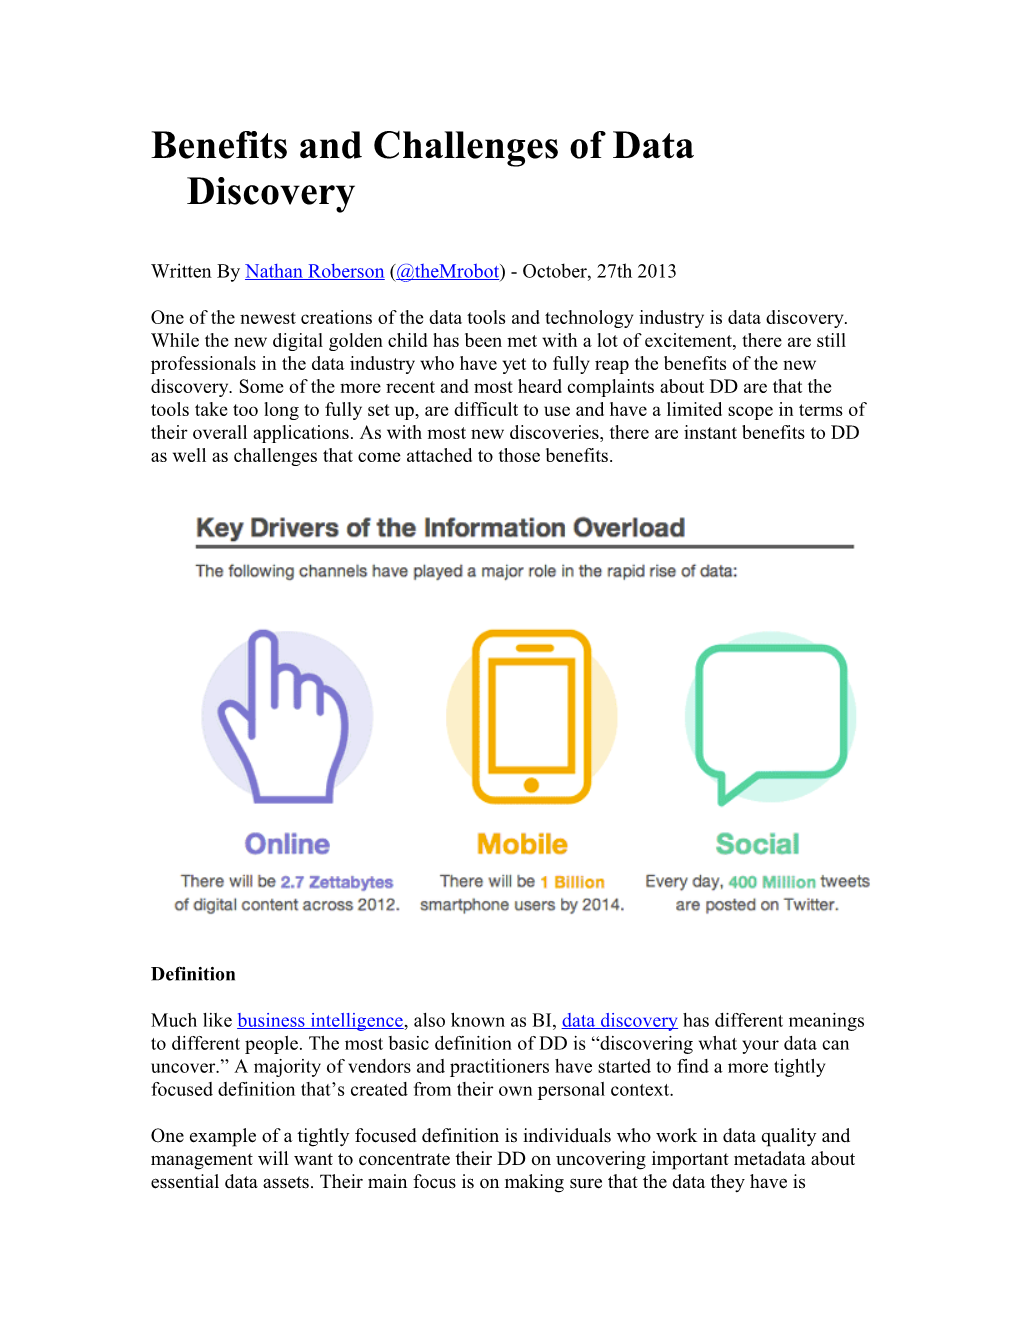 Benefits and Challenges of Data Discovery